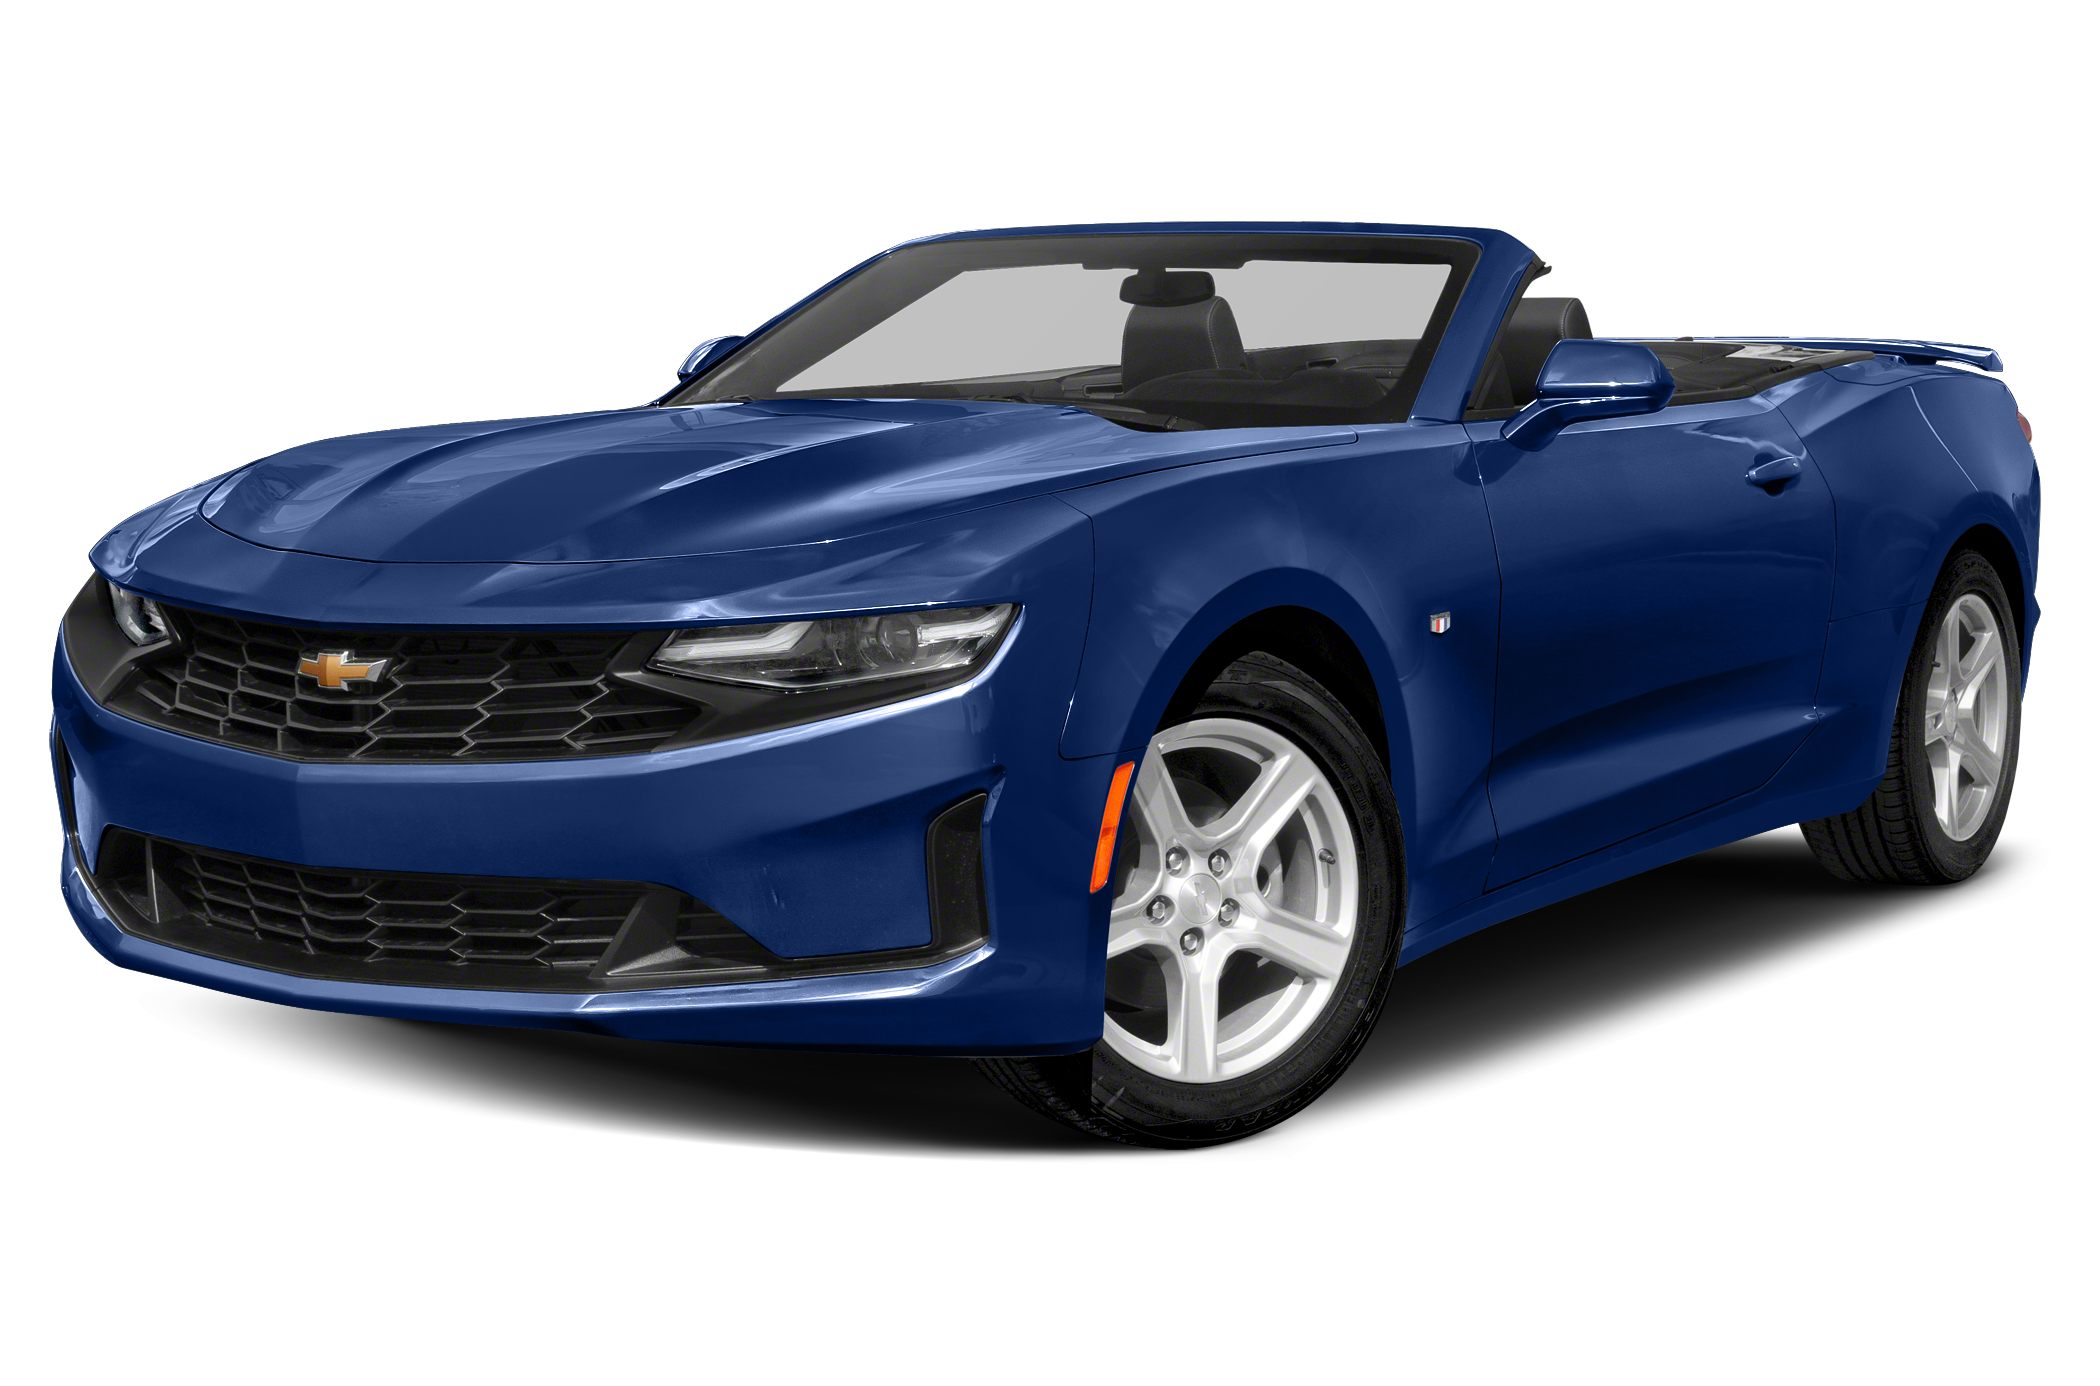 Chevrolet Camaro 2ss 2dr Convertible Specs And Prices